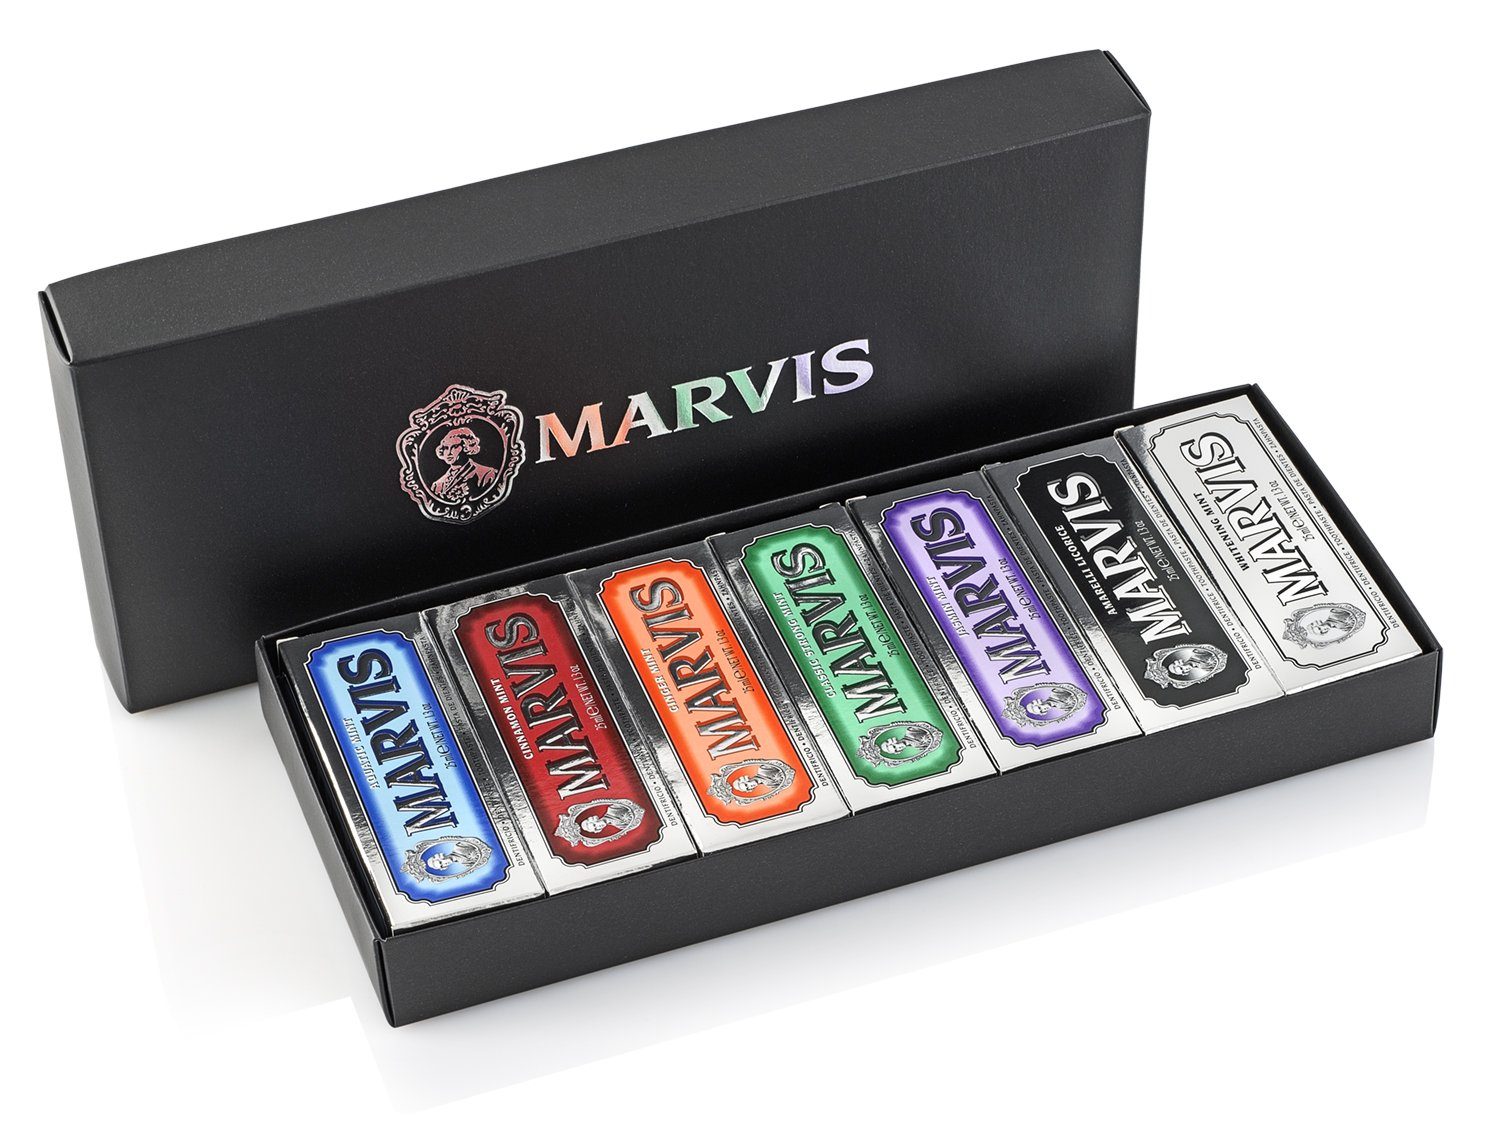 Marvis Toothpaste - Black Box Set - 7 Pack - Soap & Water Everyday